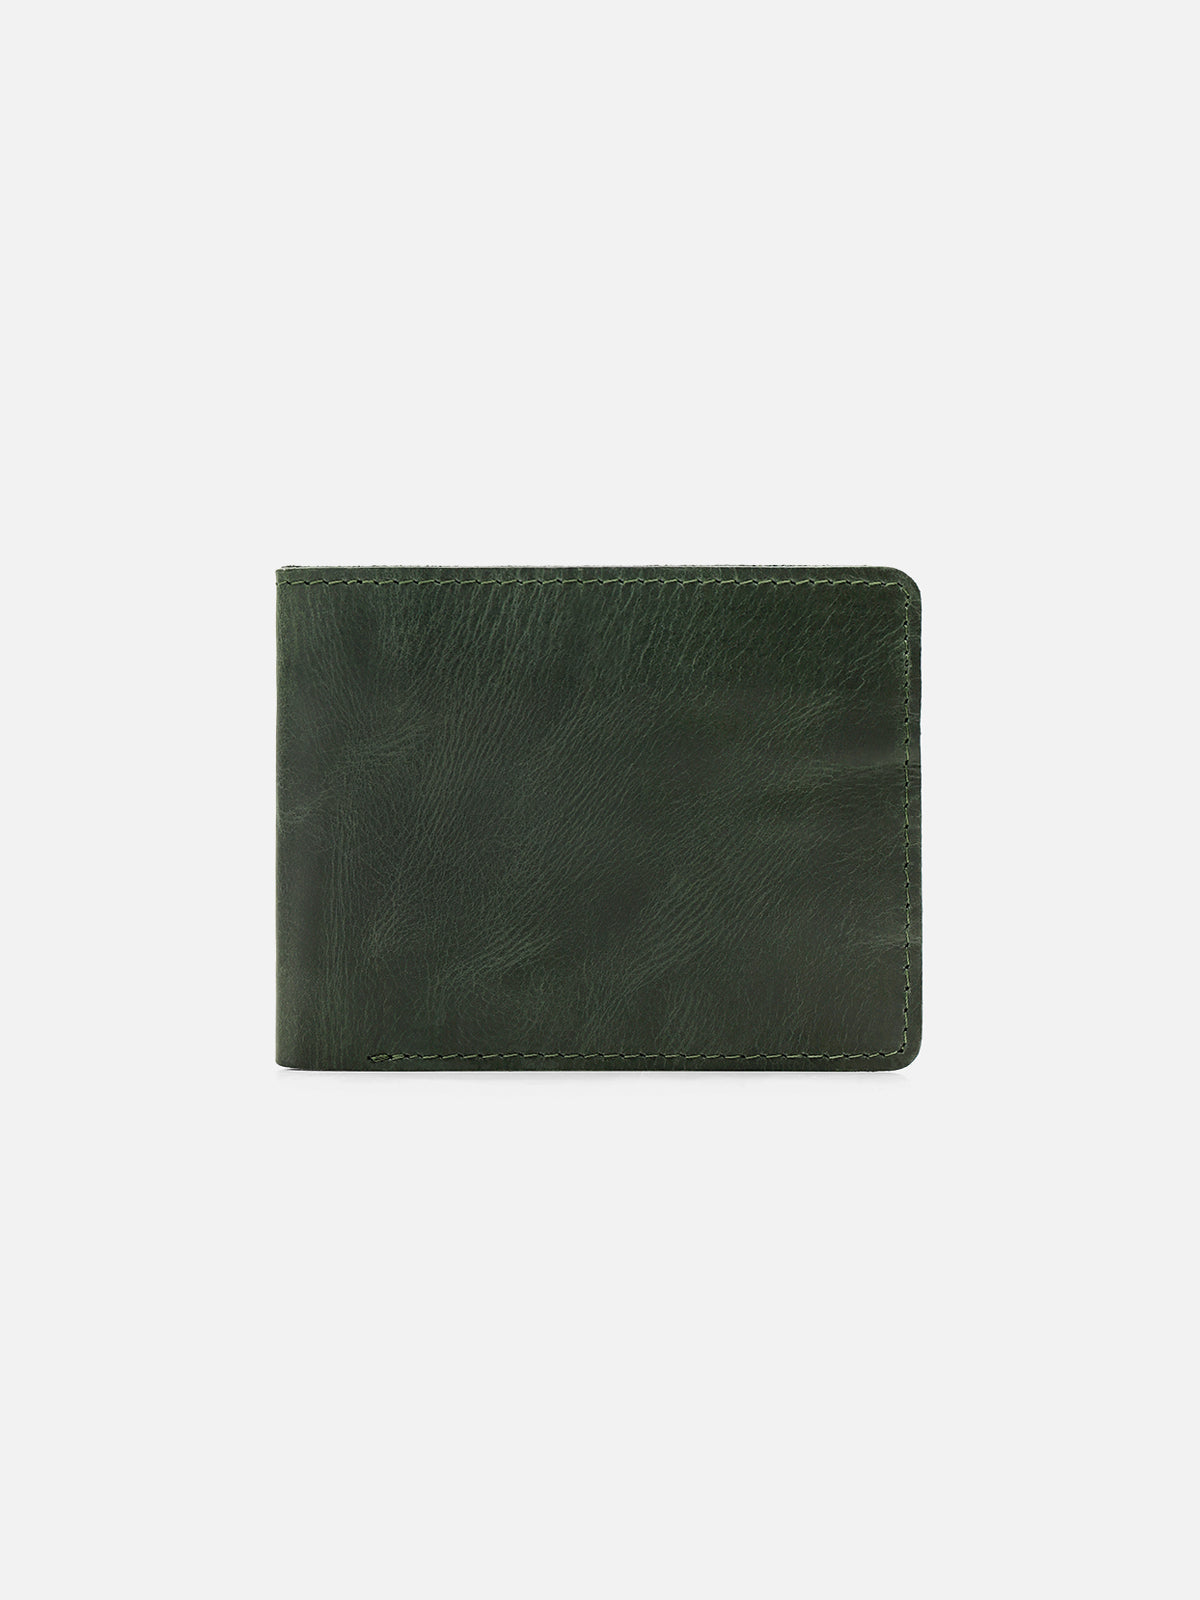 Olive Leather Wallet - FAMW23-027